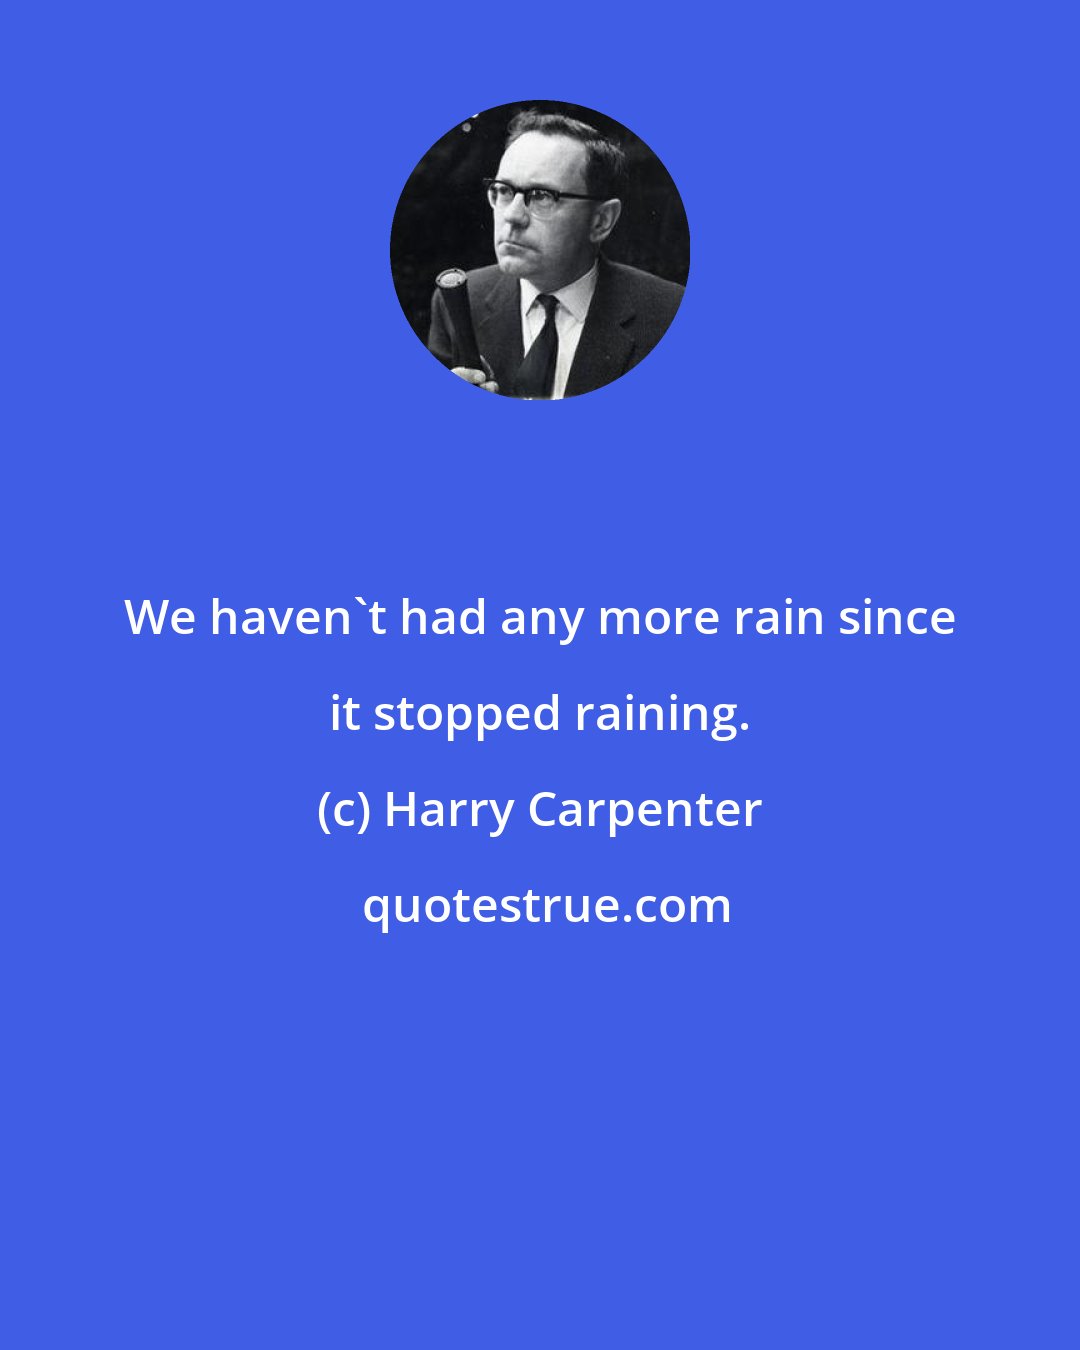 Harry Carpenter: We haven't had any more rain since it stopped raining.